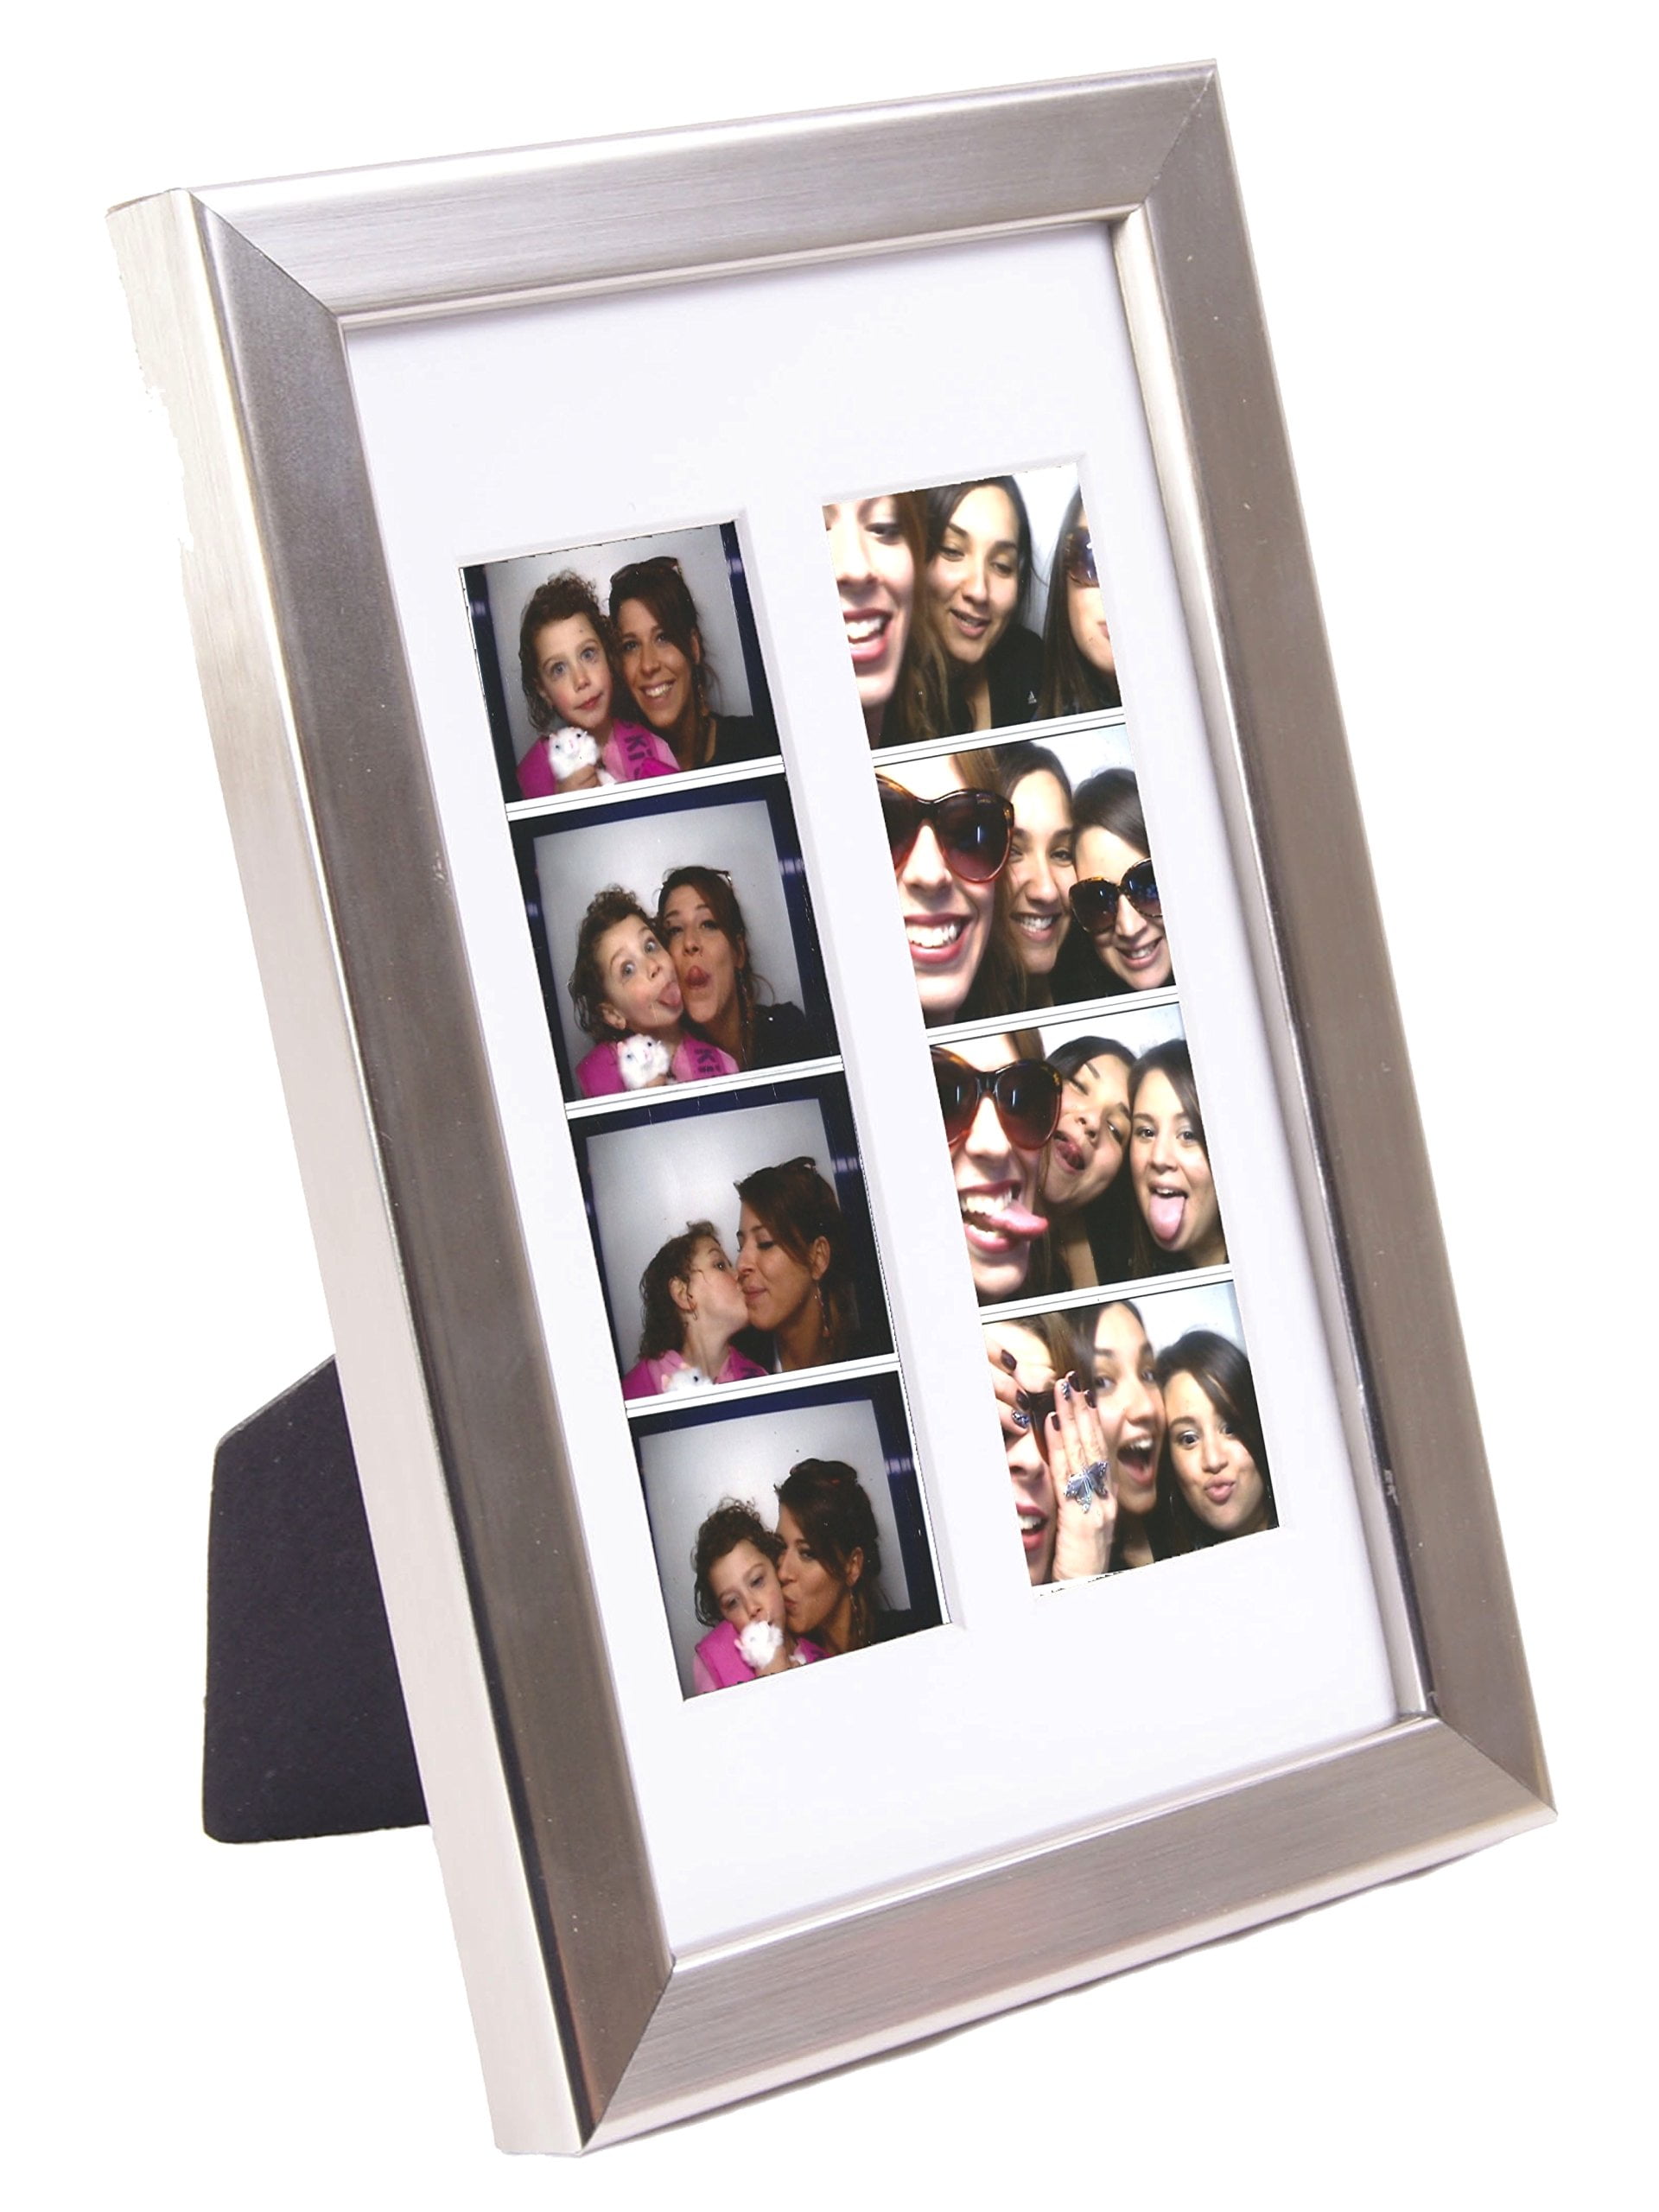 2x6 Photo Booth 1-5 Opening Frame